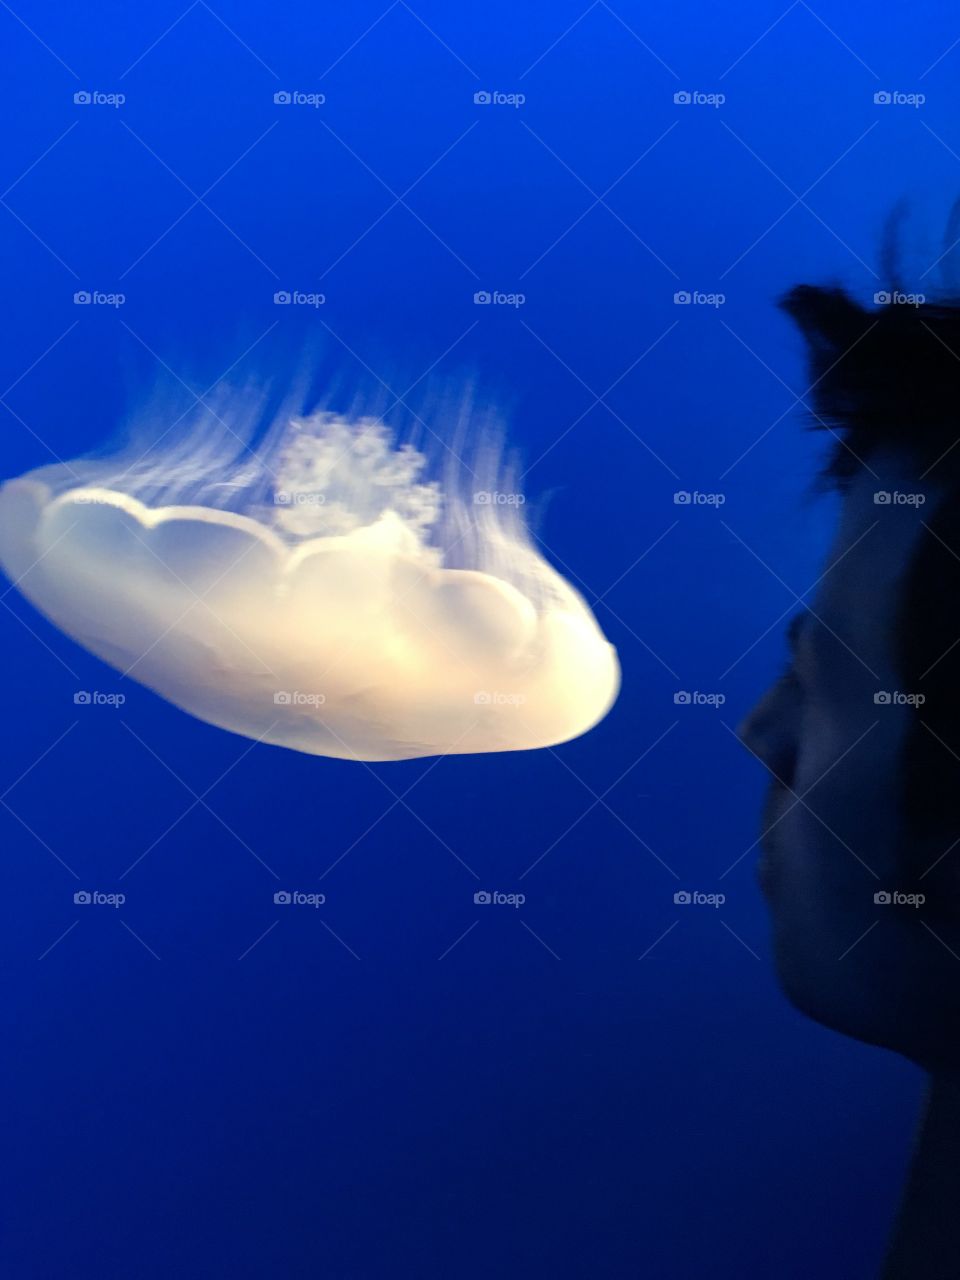 Backlit moon jellyfish in front of a blue background with a man watching it swim downwards